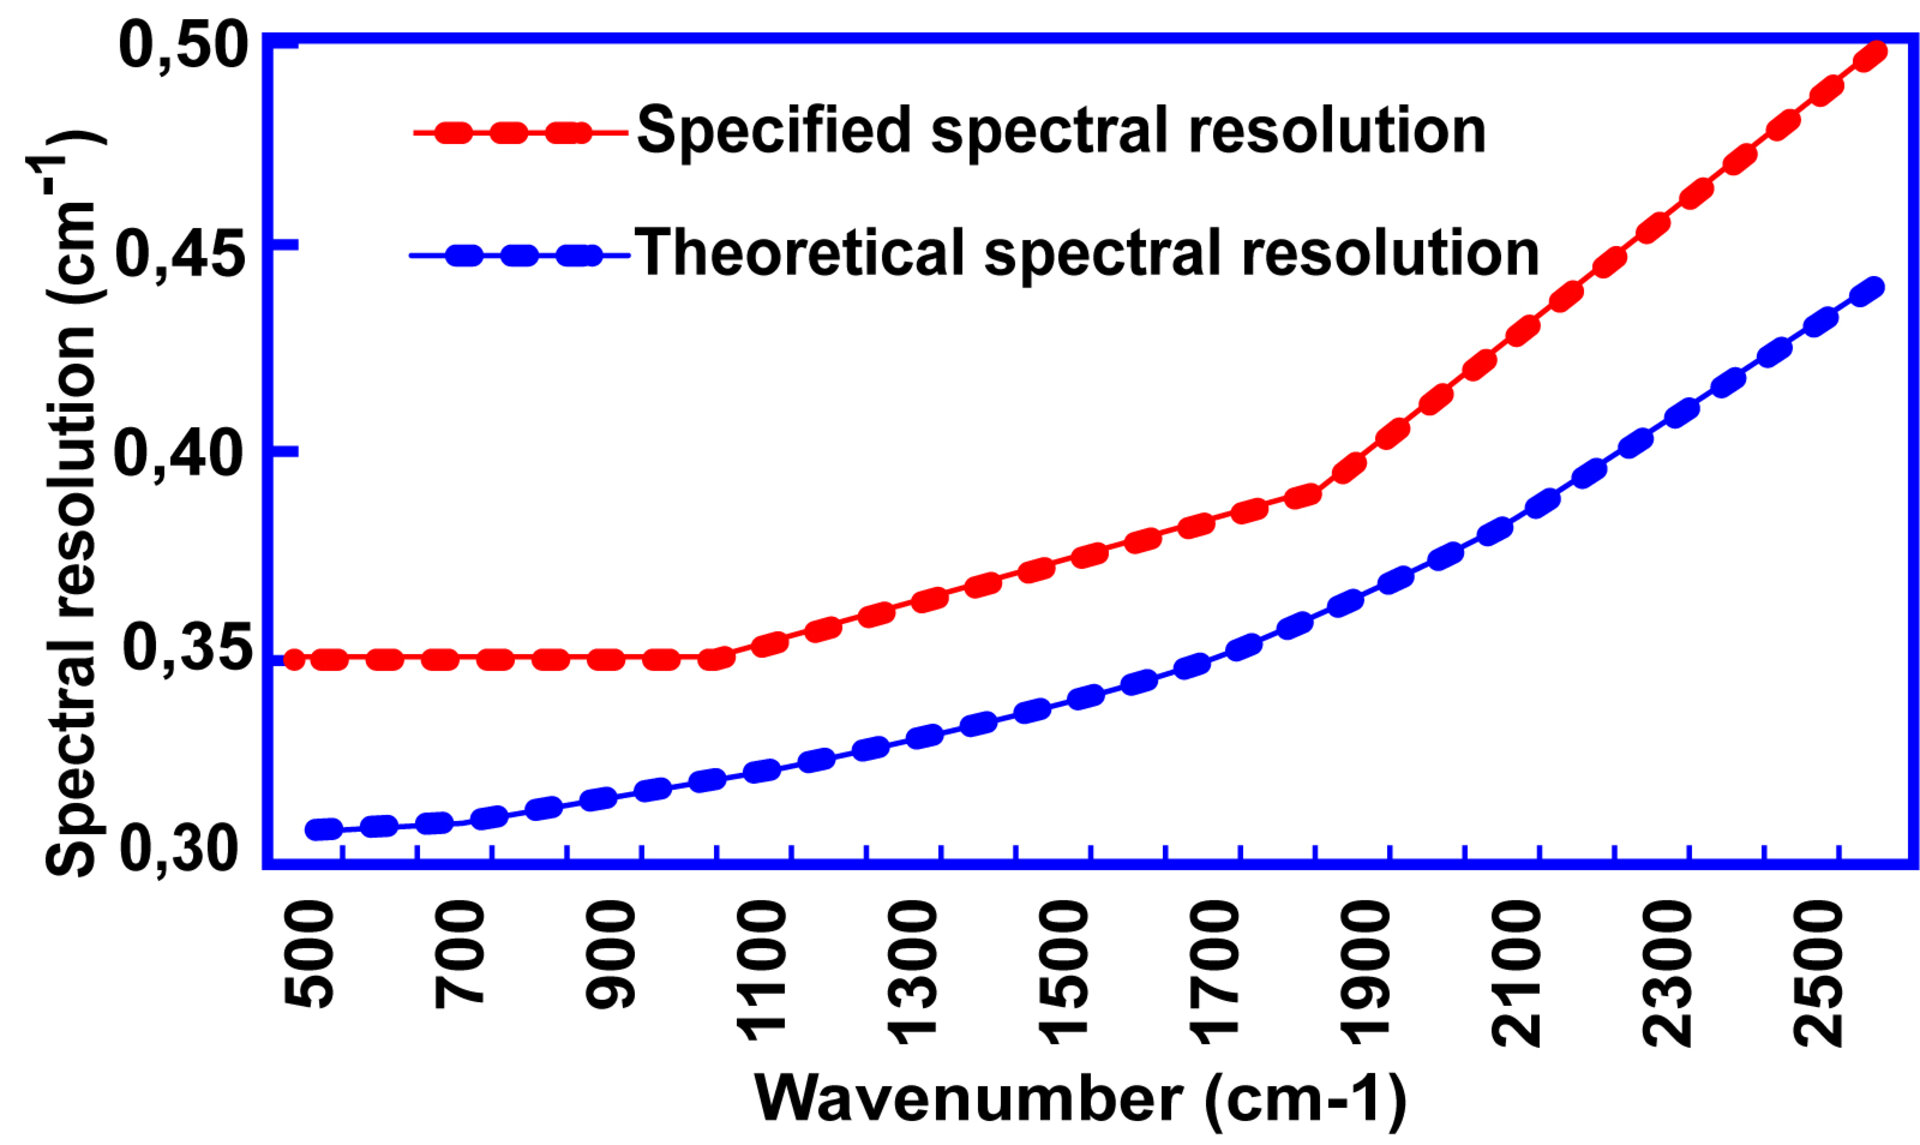 IASI spectral resolution